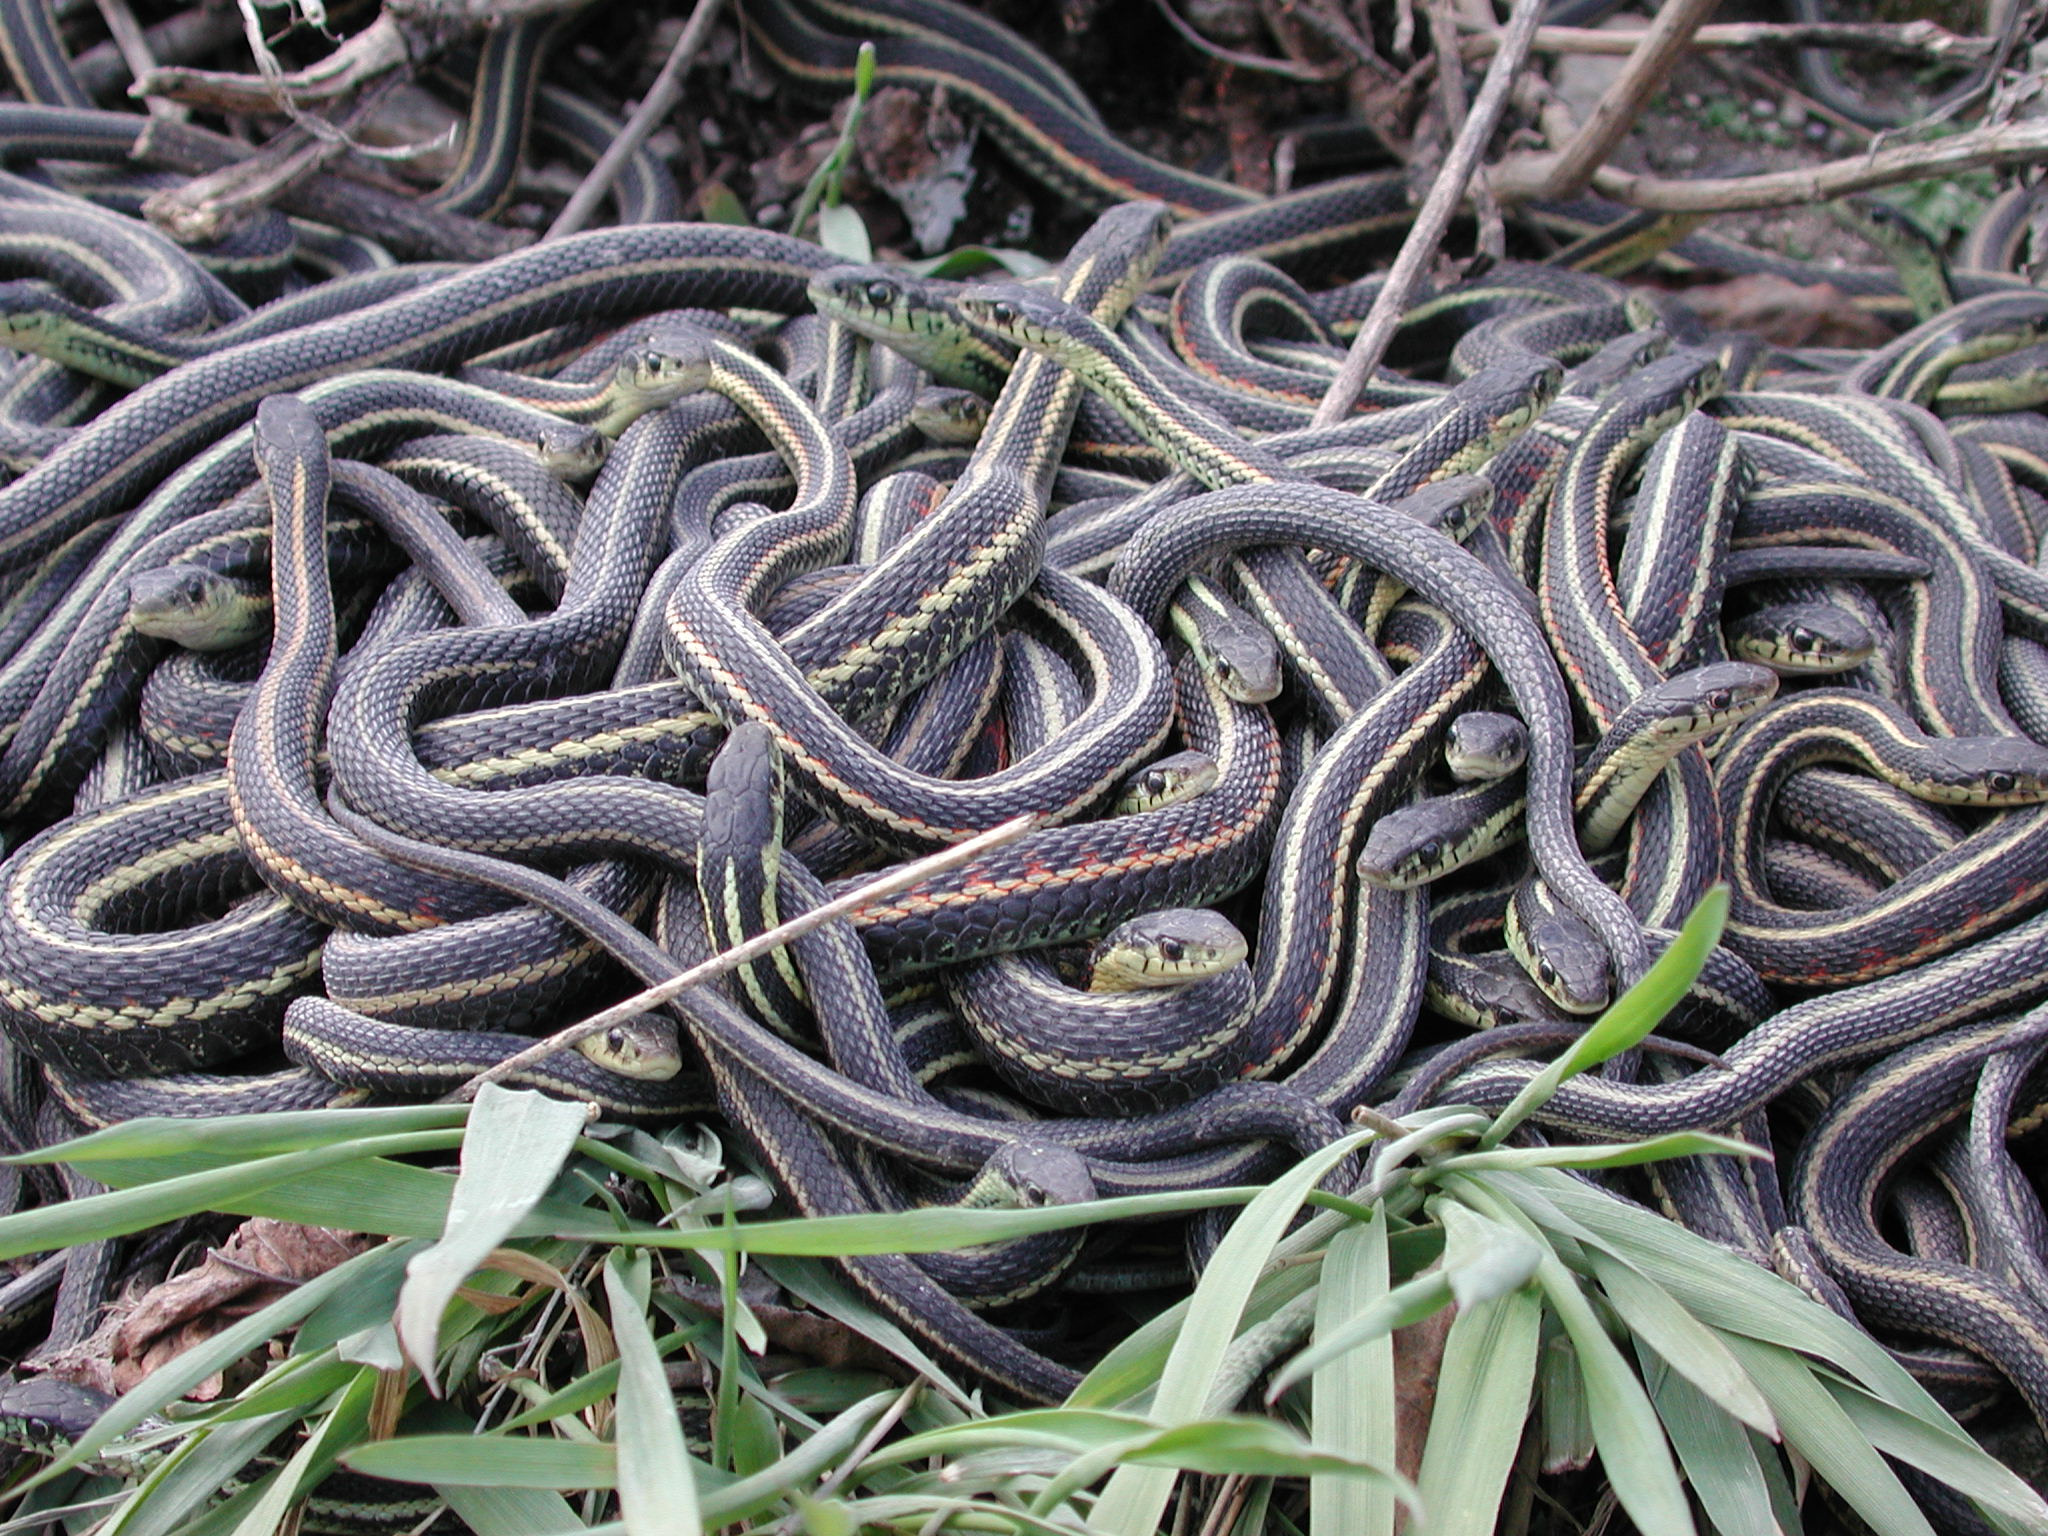 A pile of snakes